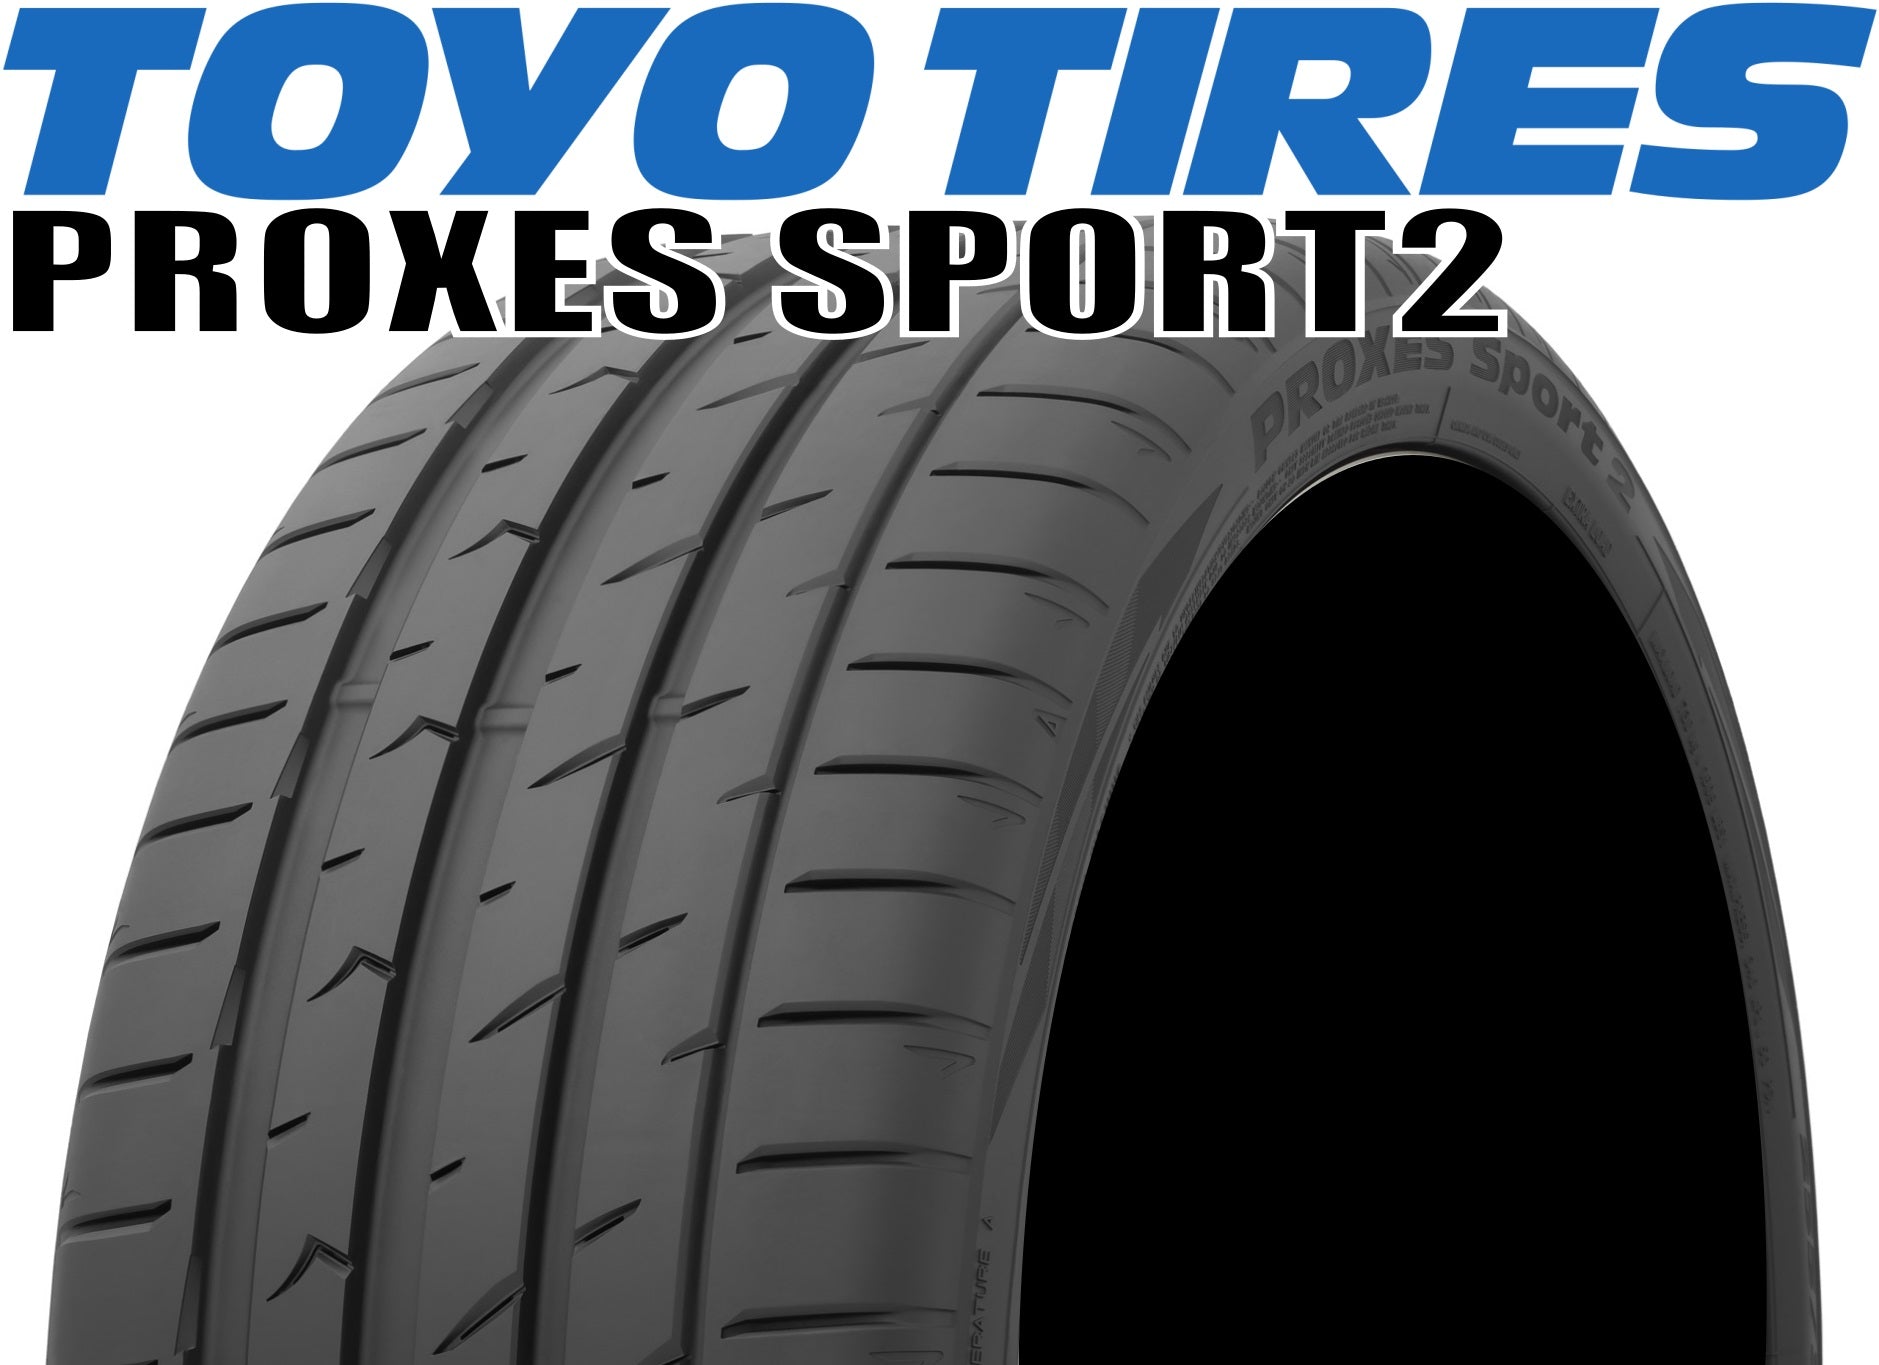 TOYO TIRES PROXES SPORT2(トーヨー プロクセススポーツ) 325/30R21 108Y 325/30-21